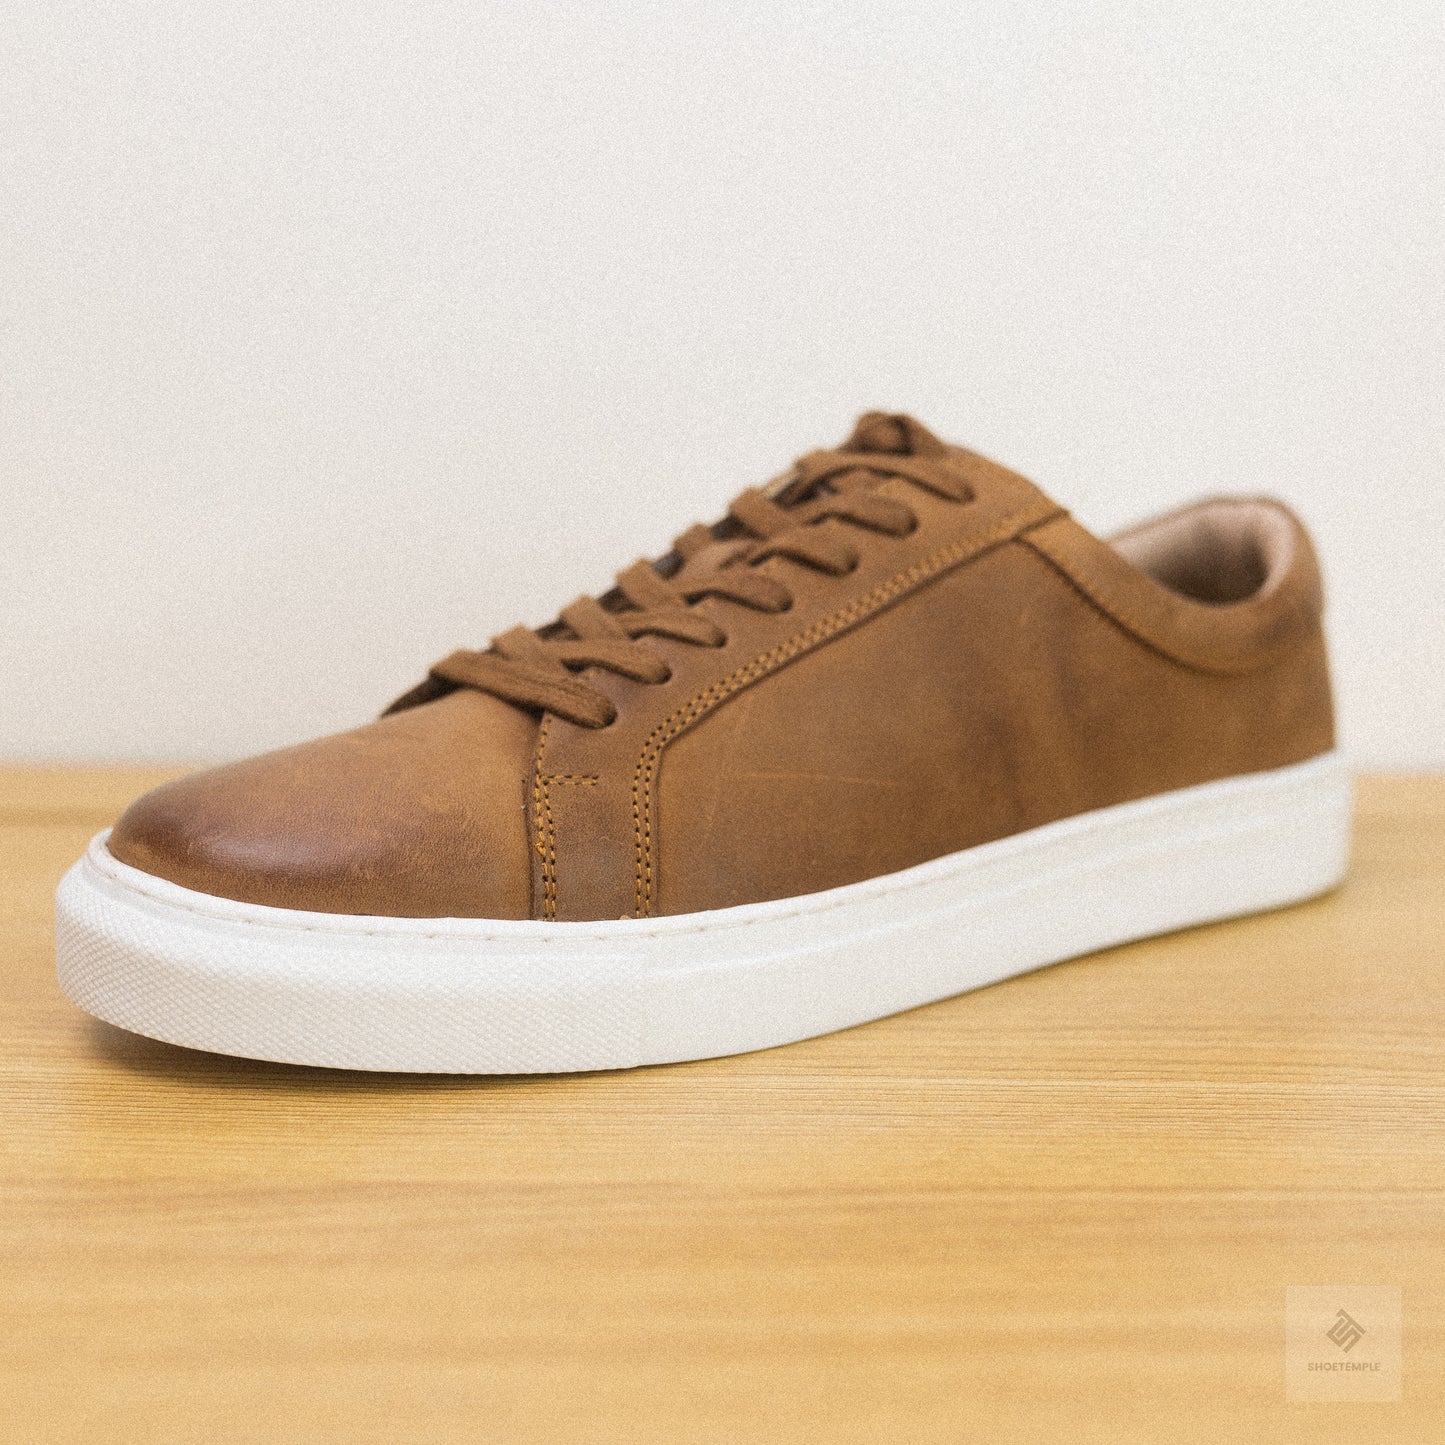 Aquila Leather Sneakers